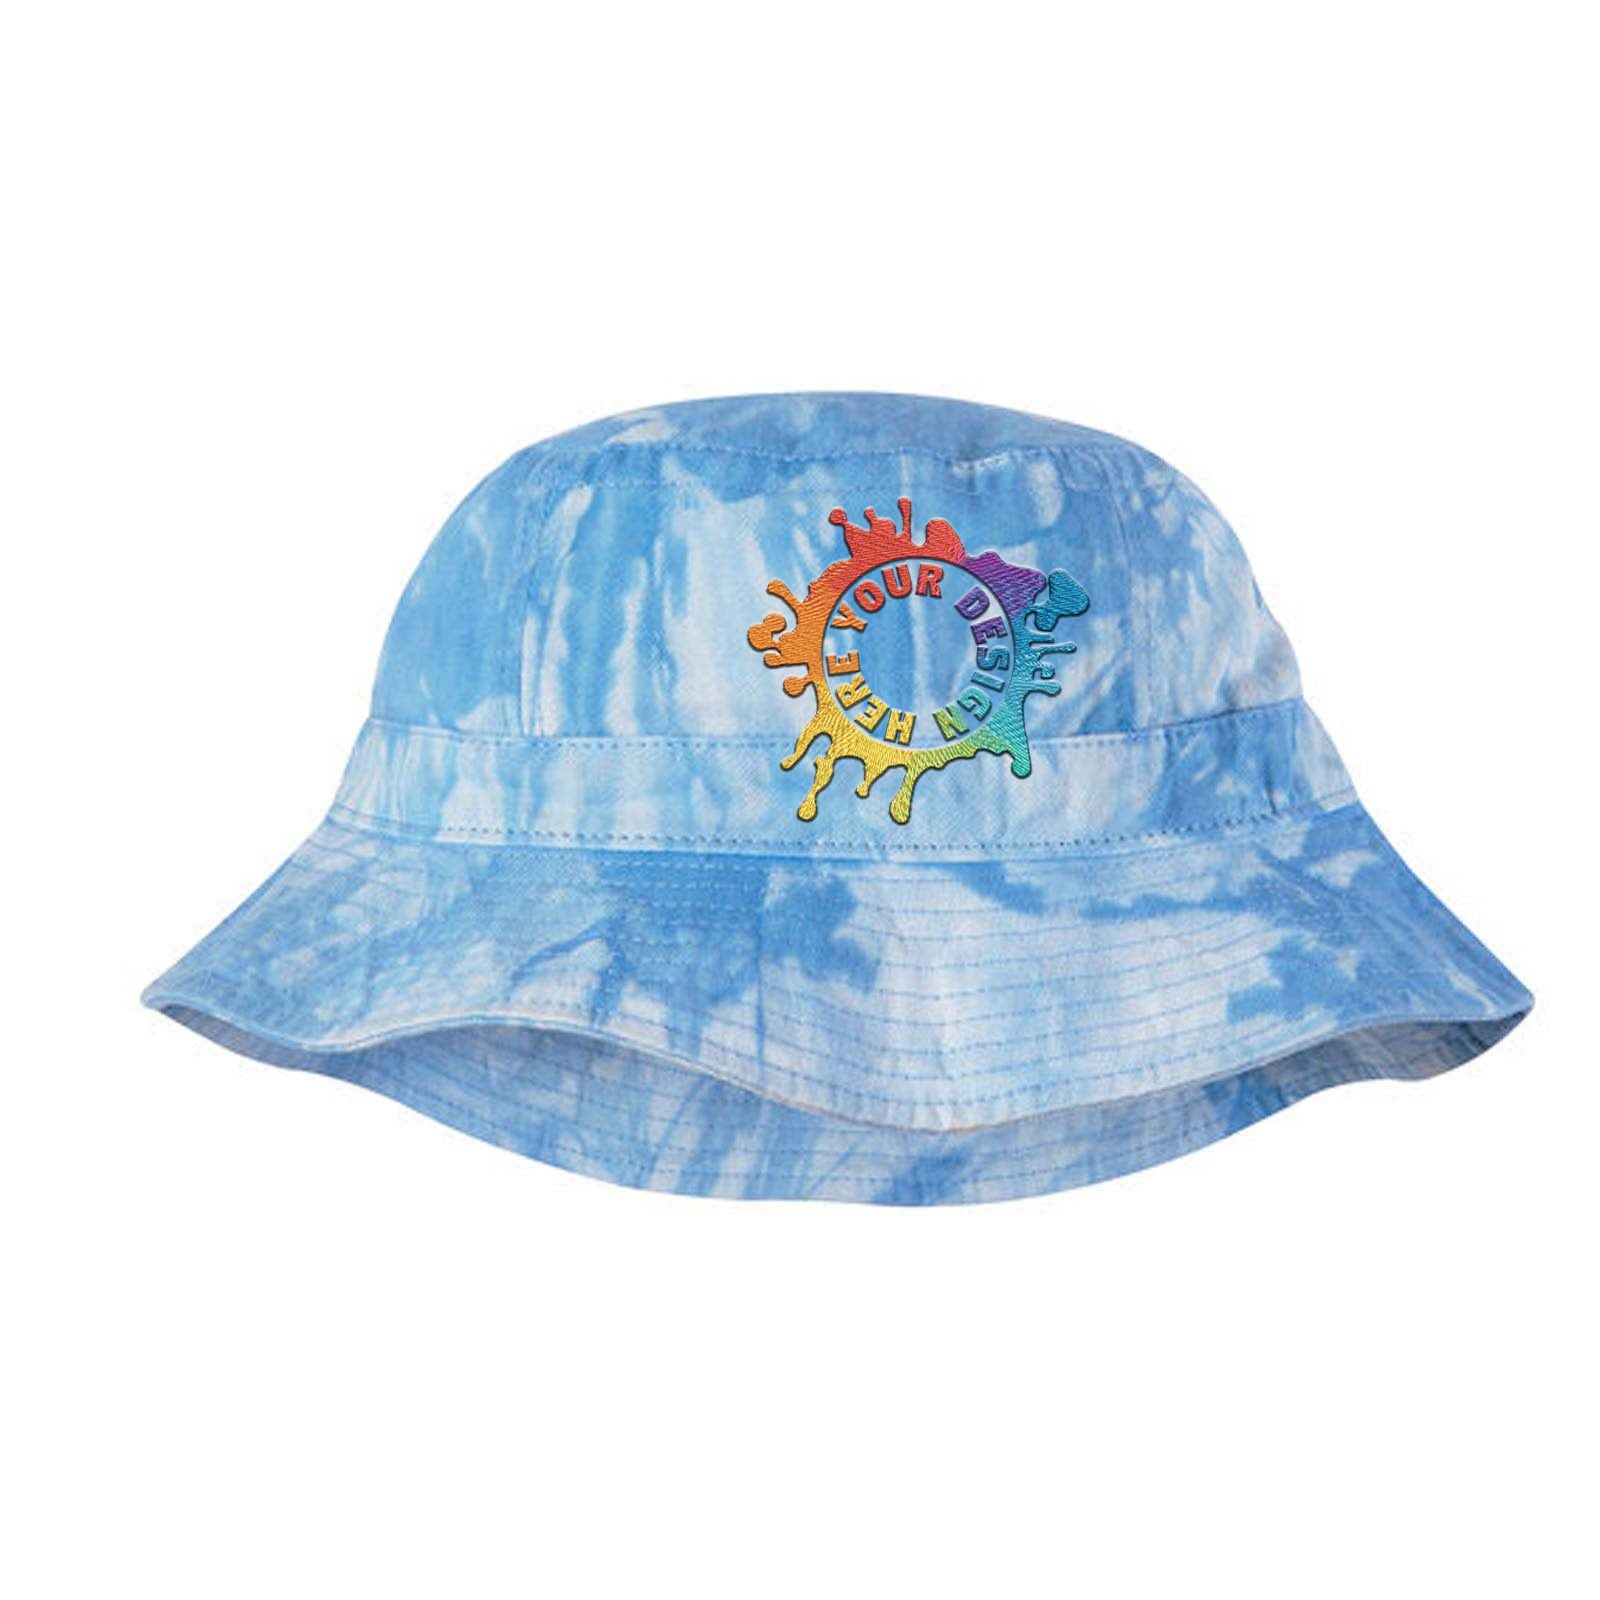 Embroidered Adams Vacationer Pigment Dyed Bucket Hat - Mato & Hash